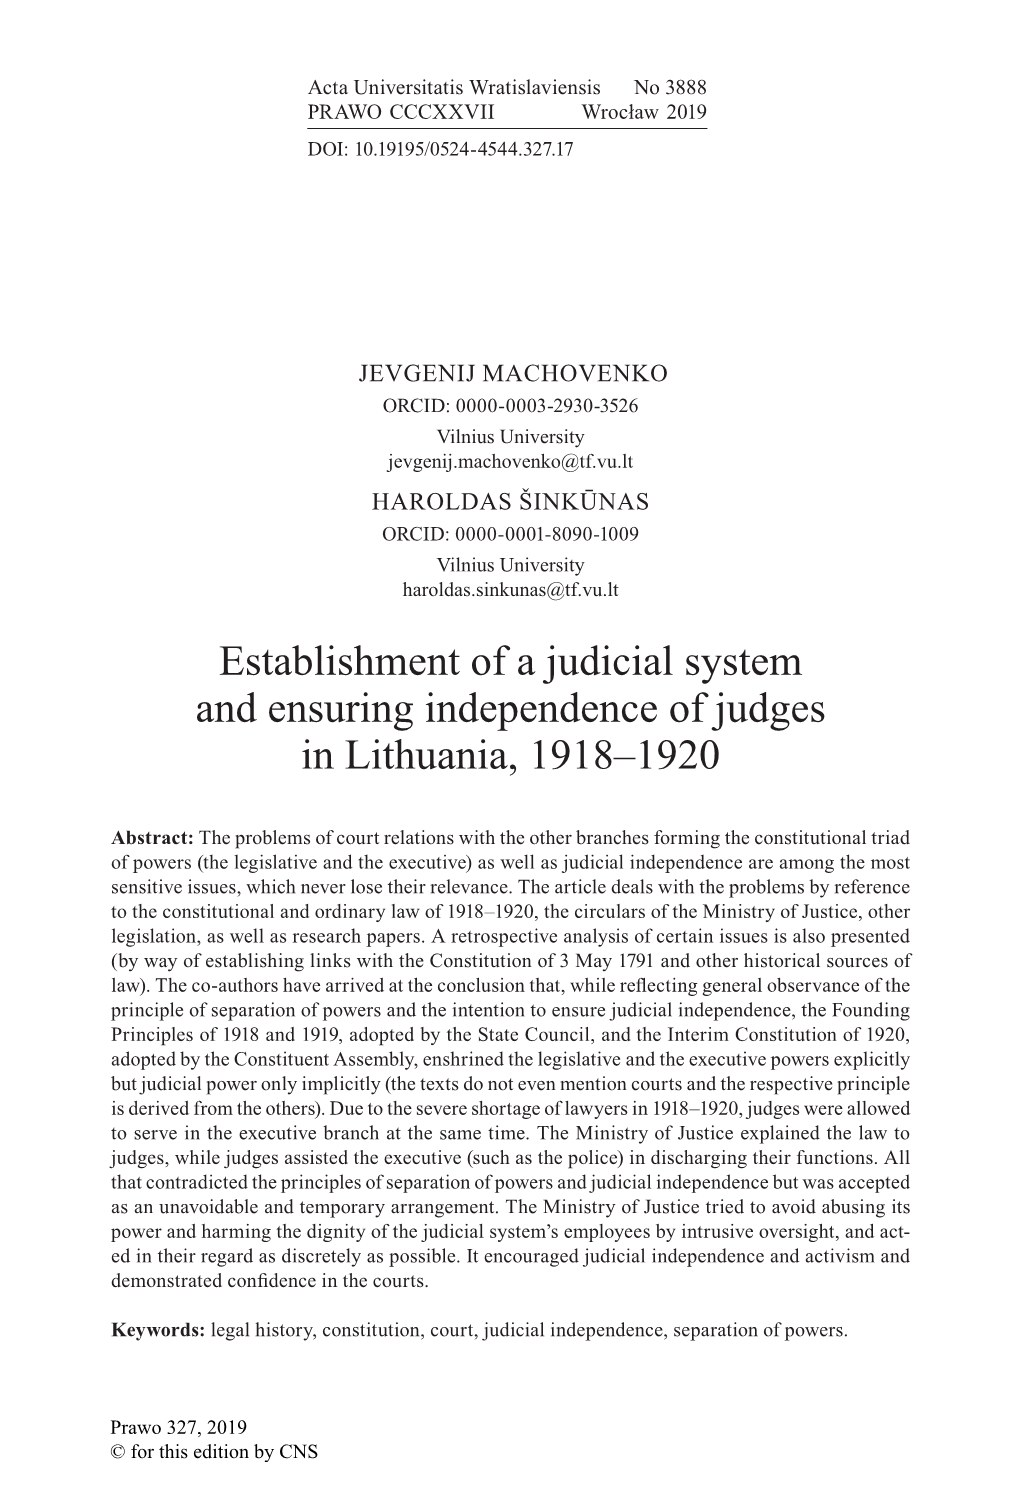 Establishment of a Judicial System and Ensuring Independence of Judges in Lithuania, 1918–1920